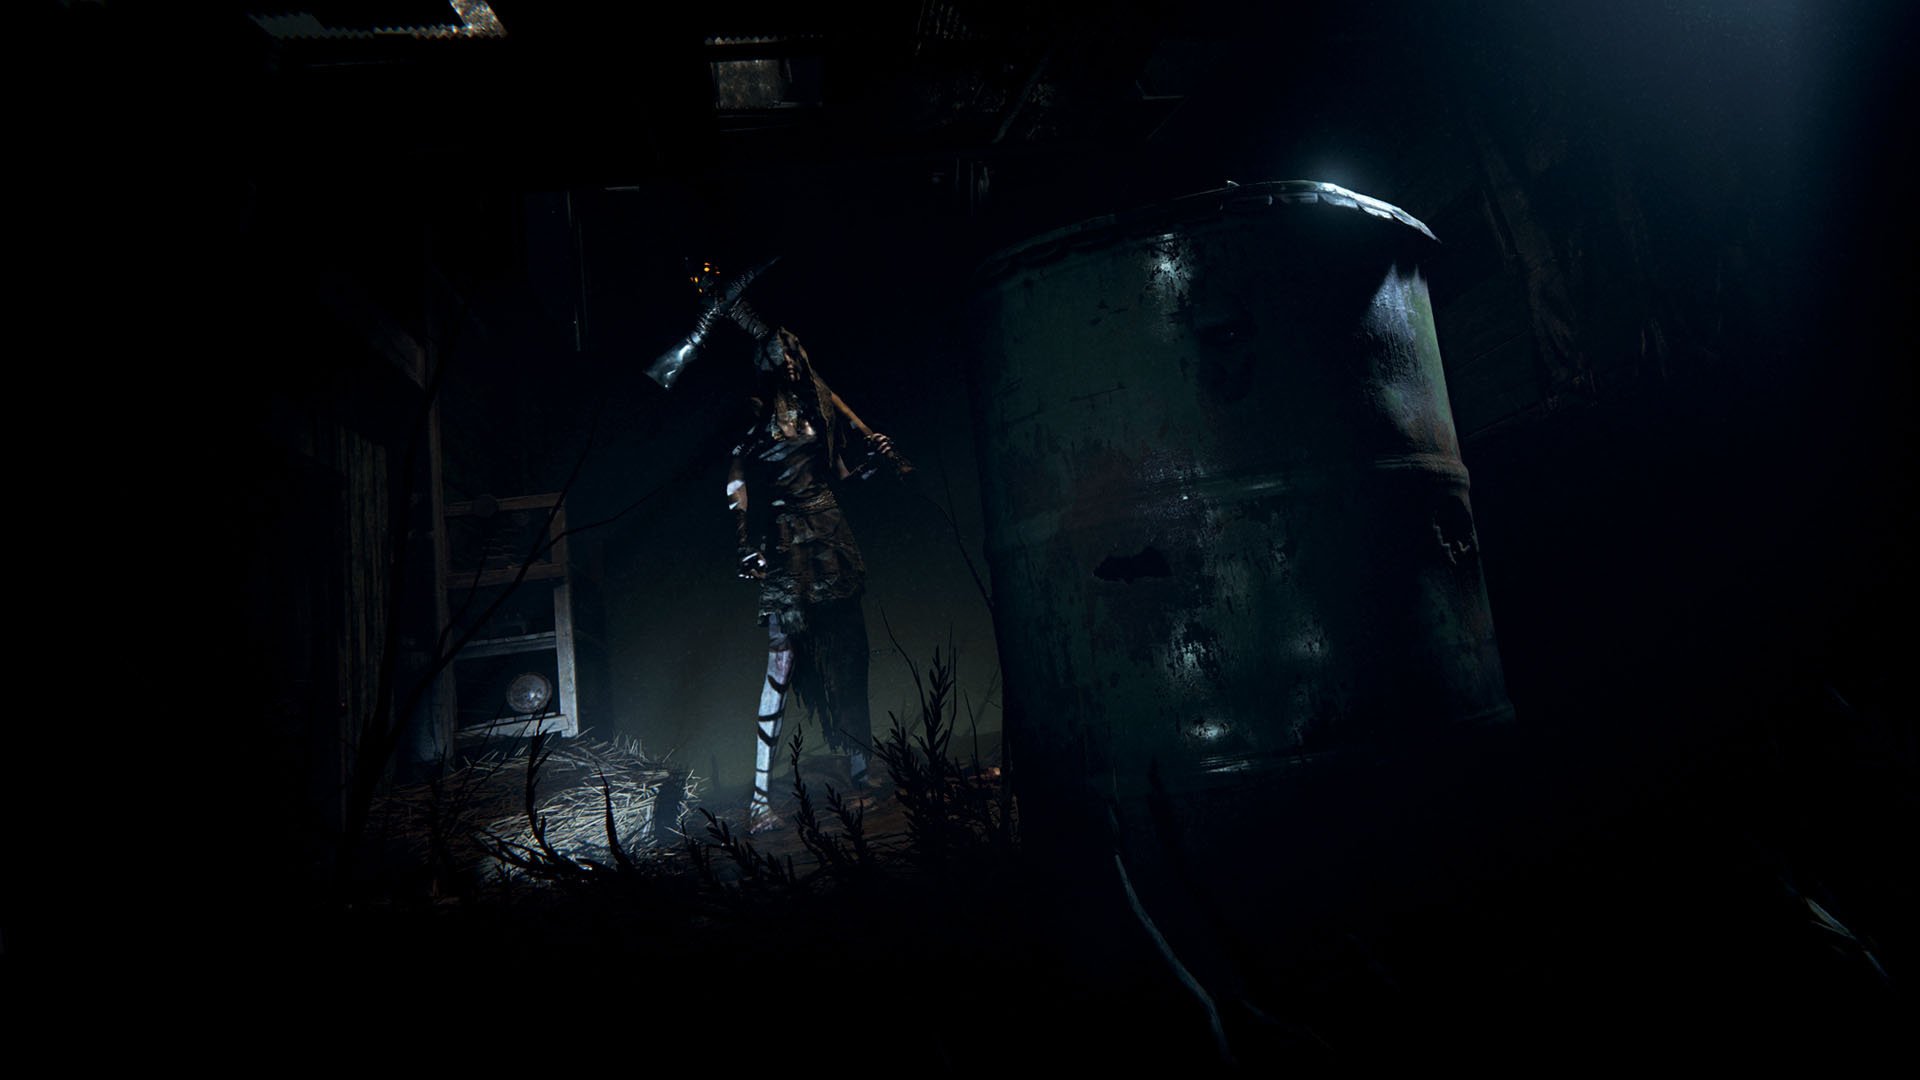 outlast 2 gameplay download